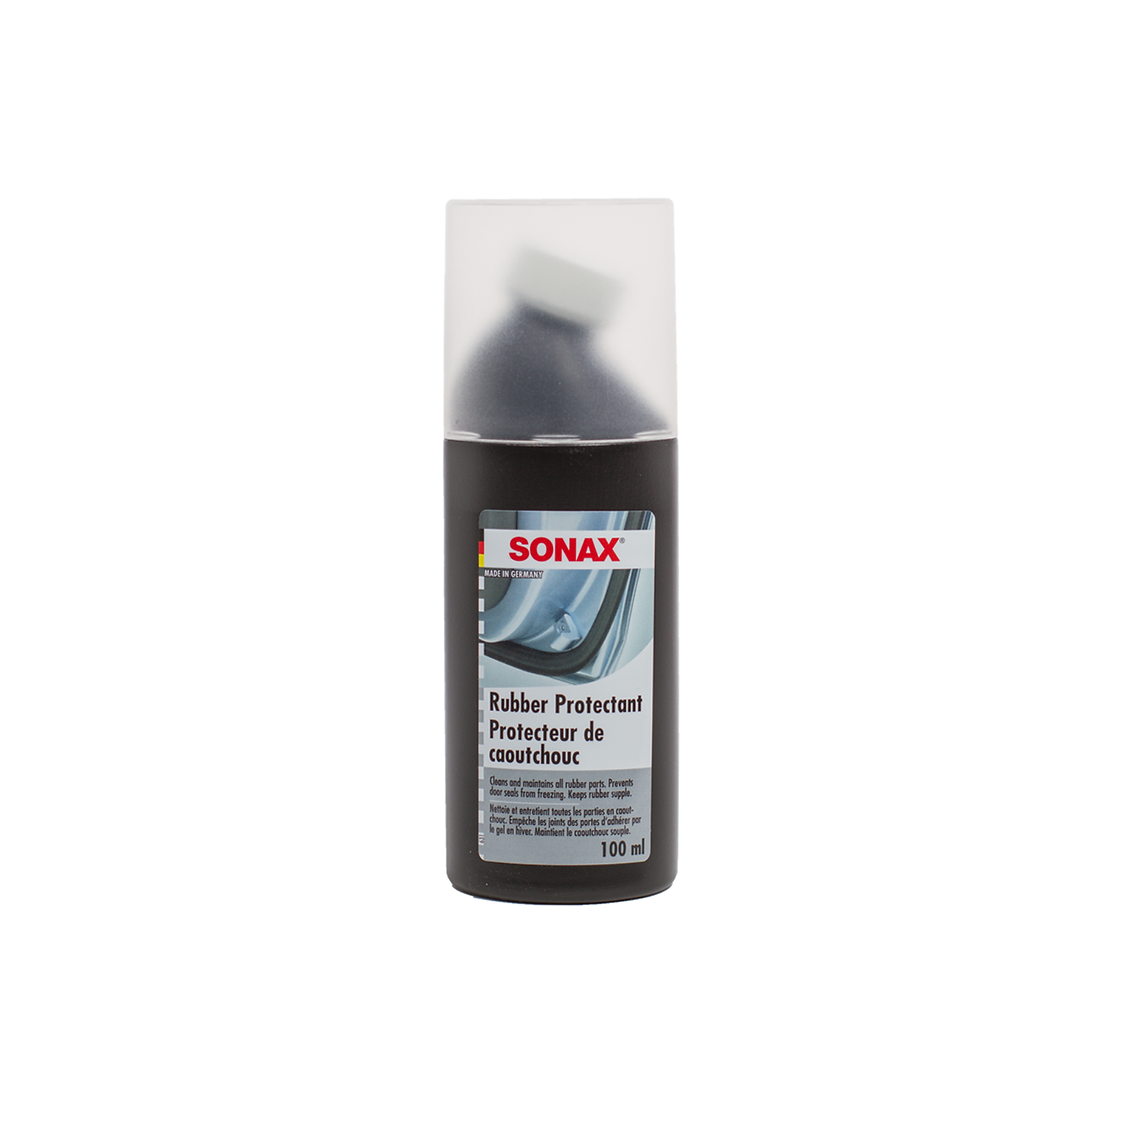 Sonax Rubber Protectant w/applicator 100mL